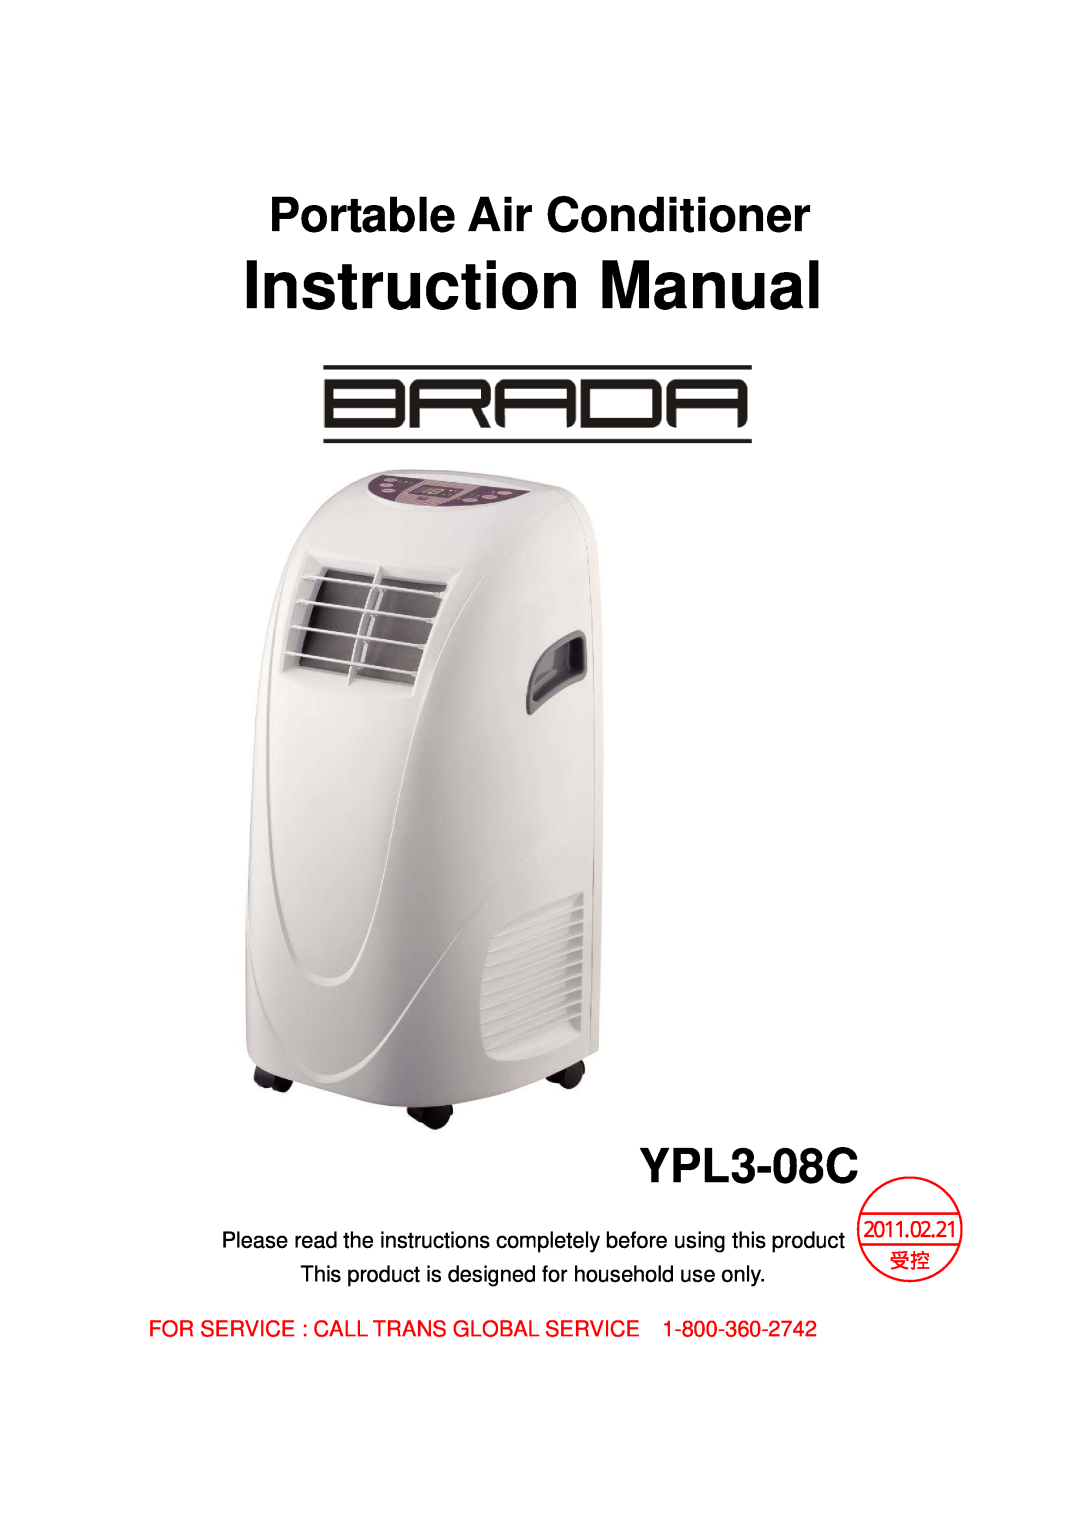 Brada Appliances YPL3-08C instruction manual Portable Air Conditioner, For Service Call Trans Global Service 